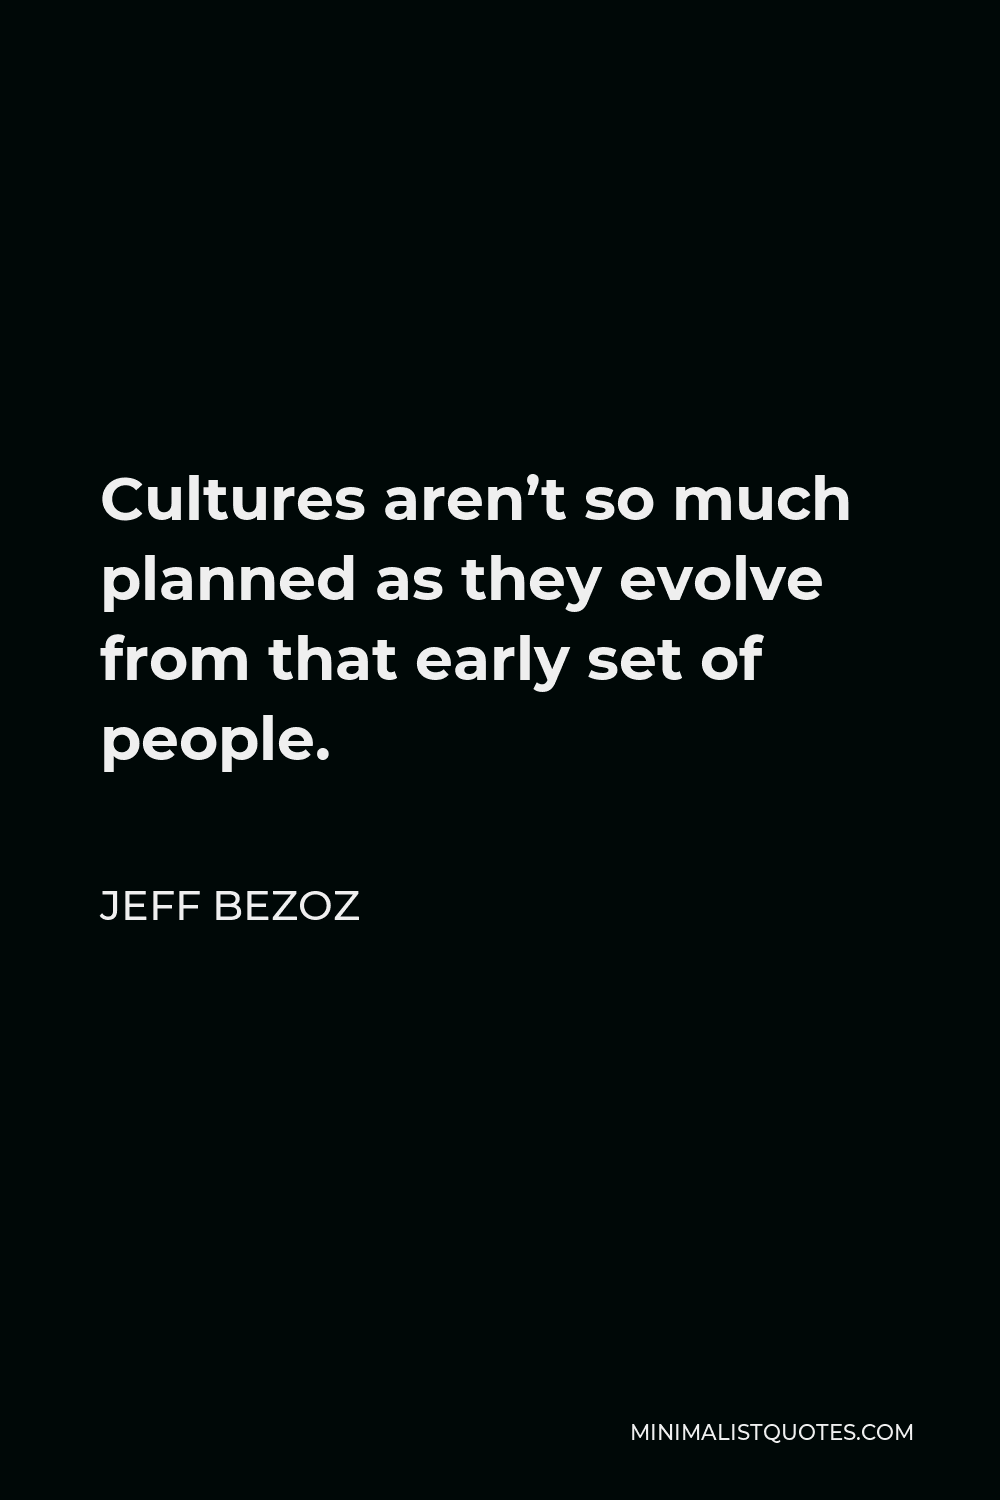 Jeff Bezoz Quote - Cultures aren’t so much planned as they evolve from that early set of people.